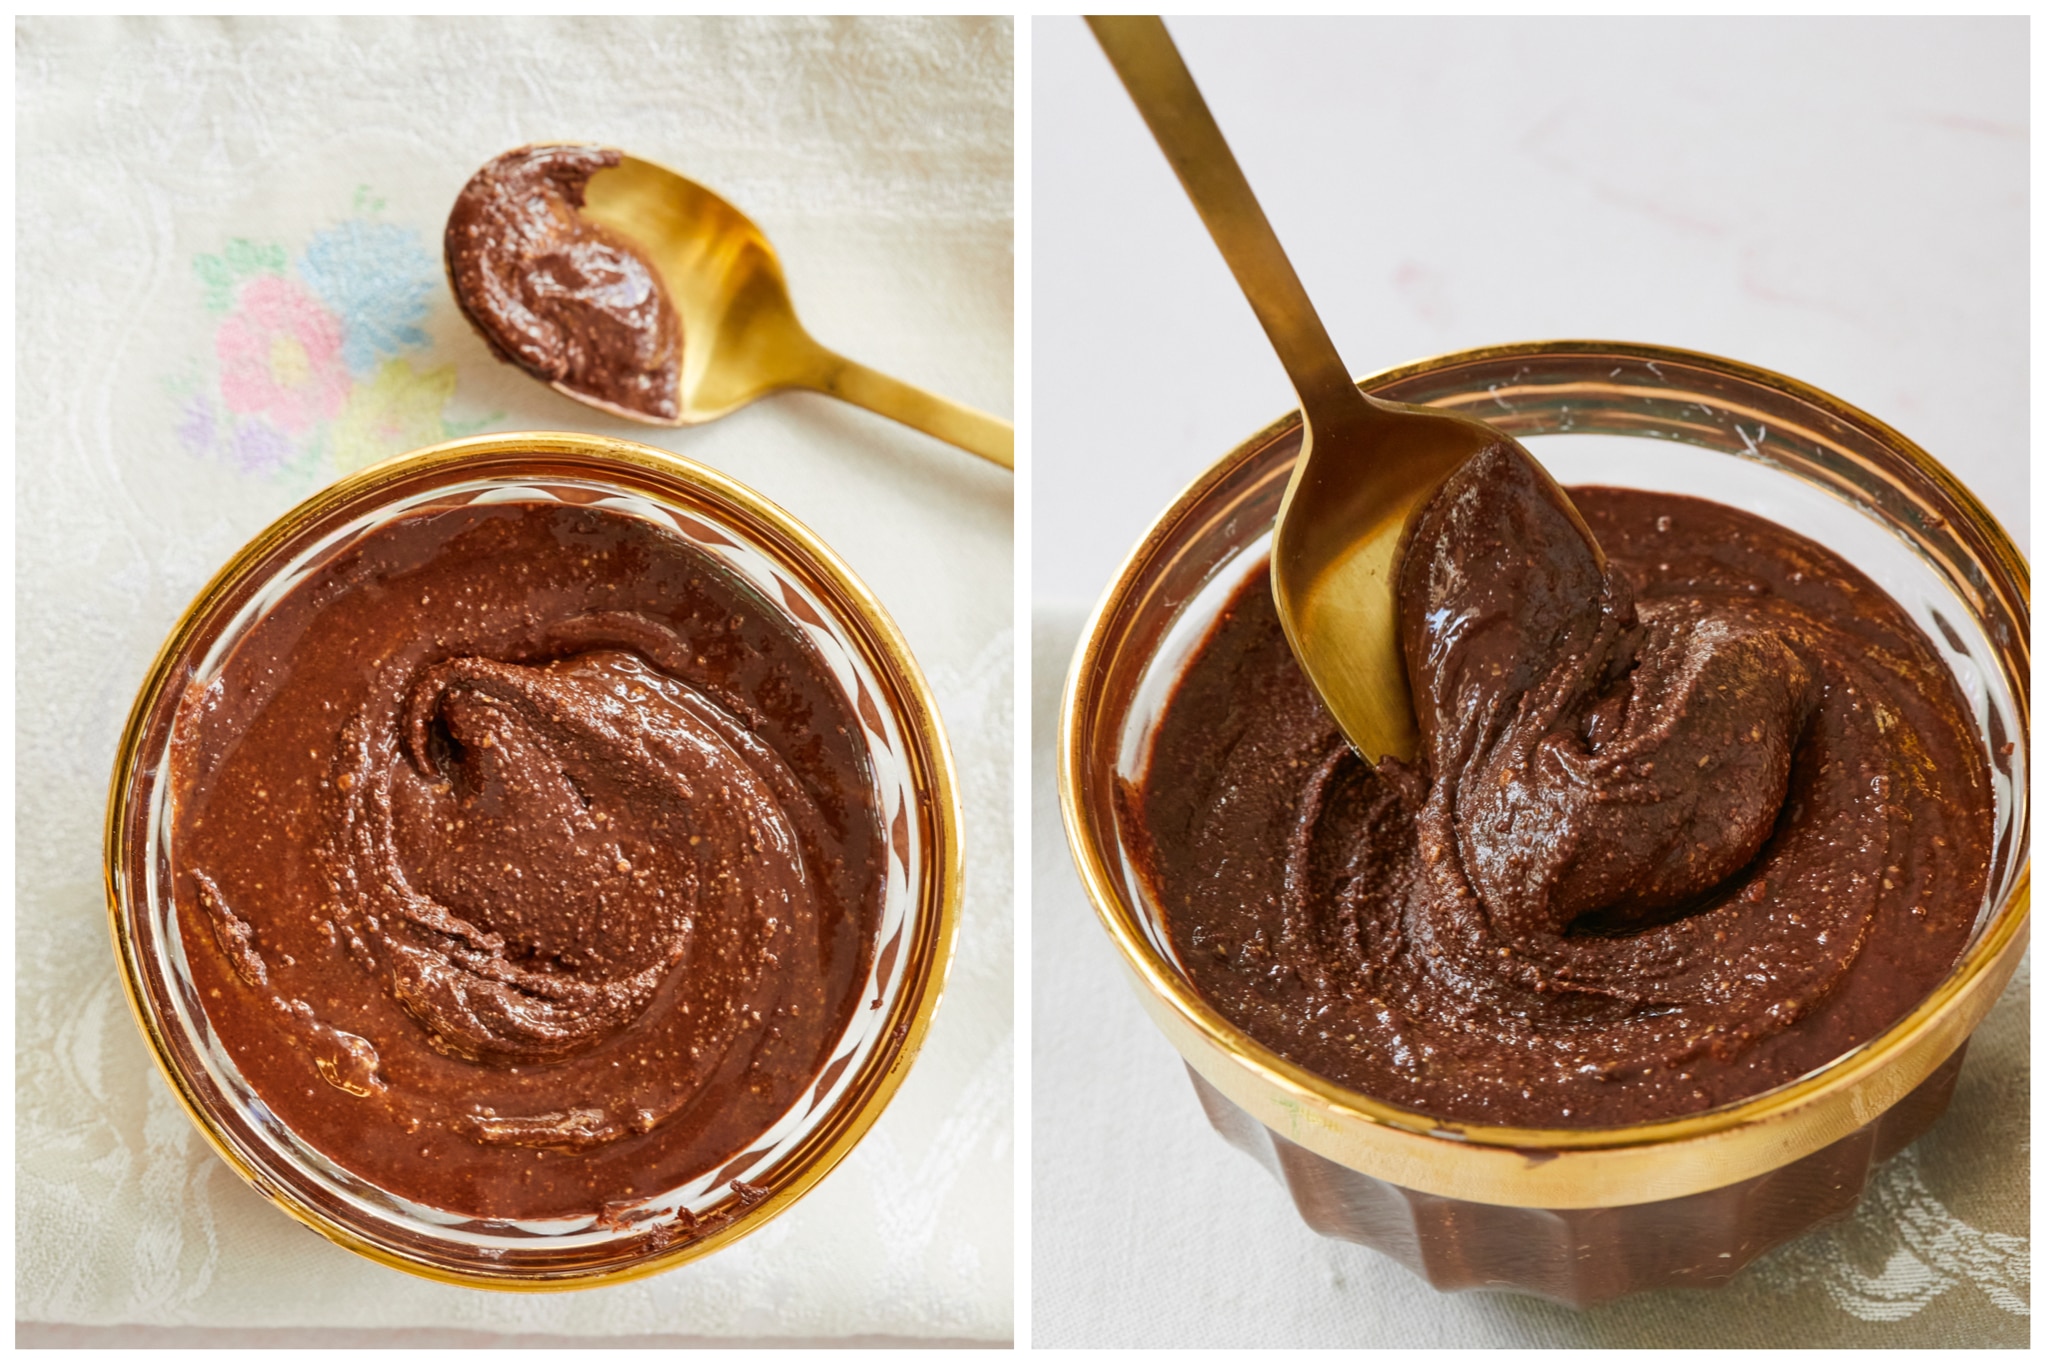 Finished Homemade Nutella in a bowl, shot from overhead, next to a photo of finished Homemade Nutella on the right, with a spoon in the glass bowl.